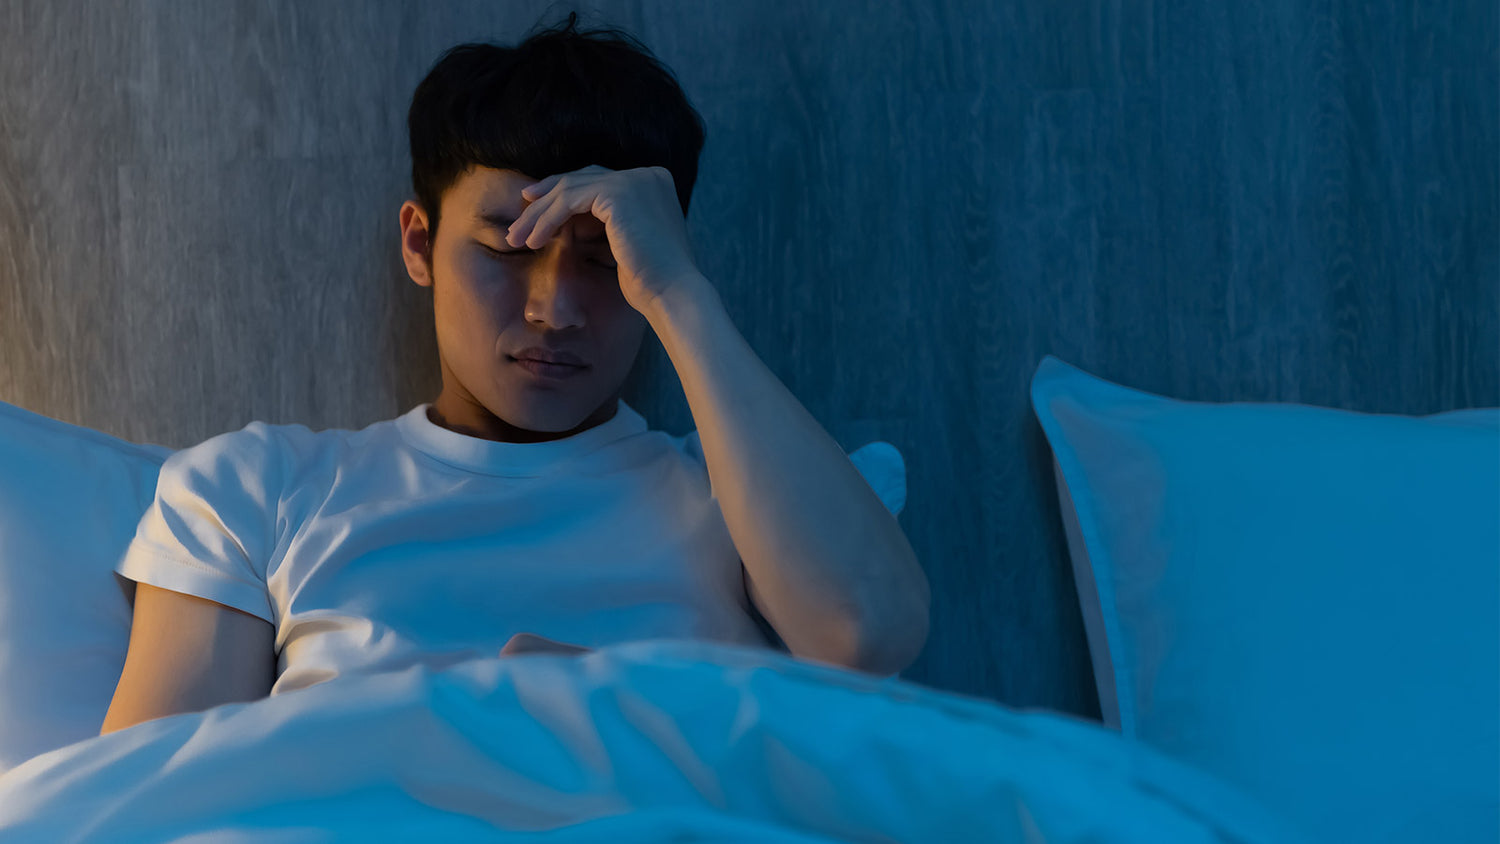 Man struggling to sleep at night and asking himself 'why can't I sleep?'